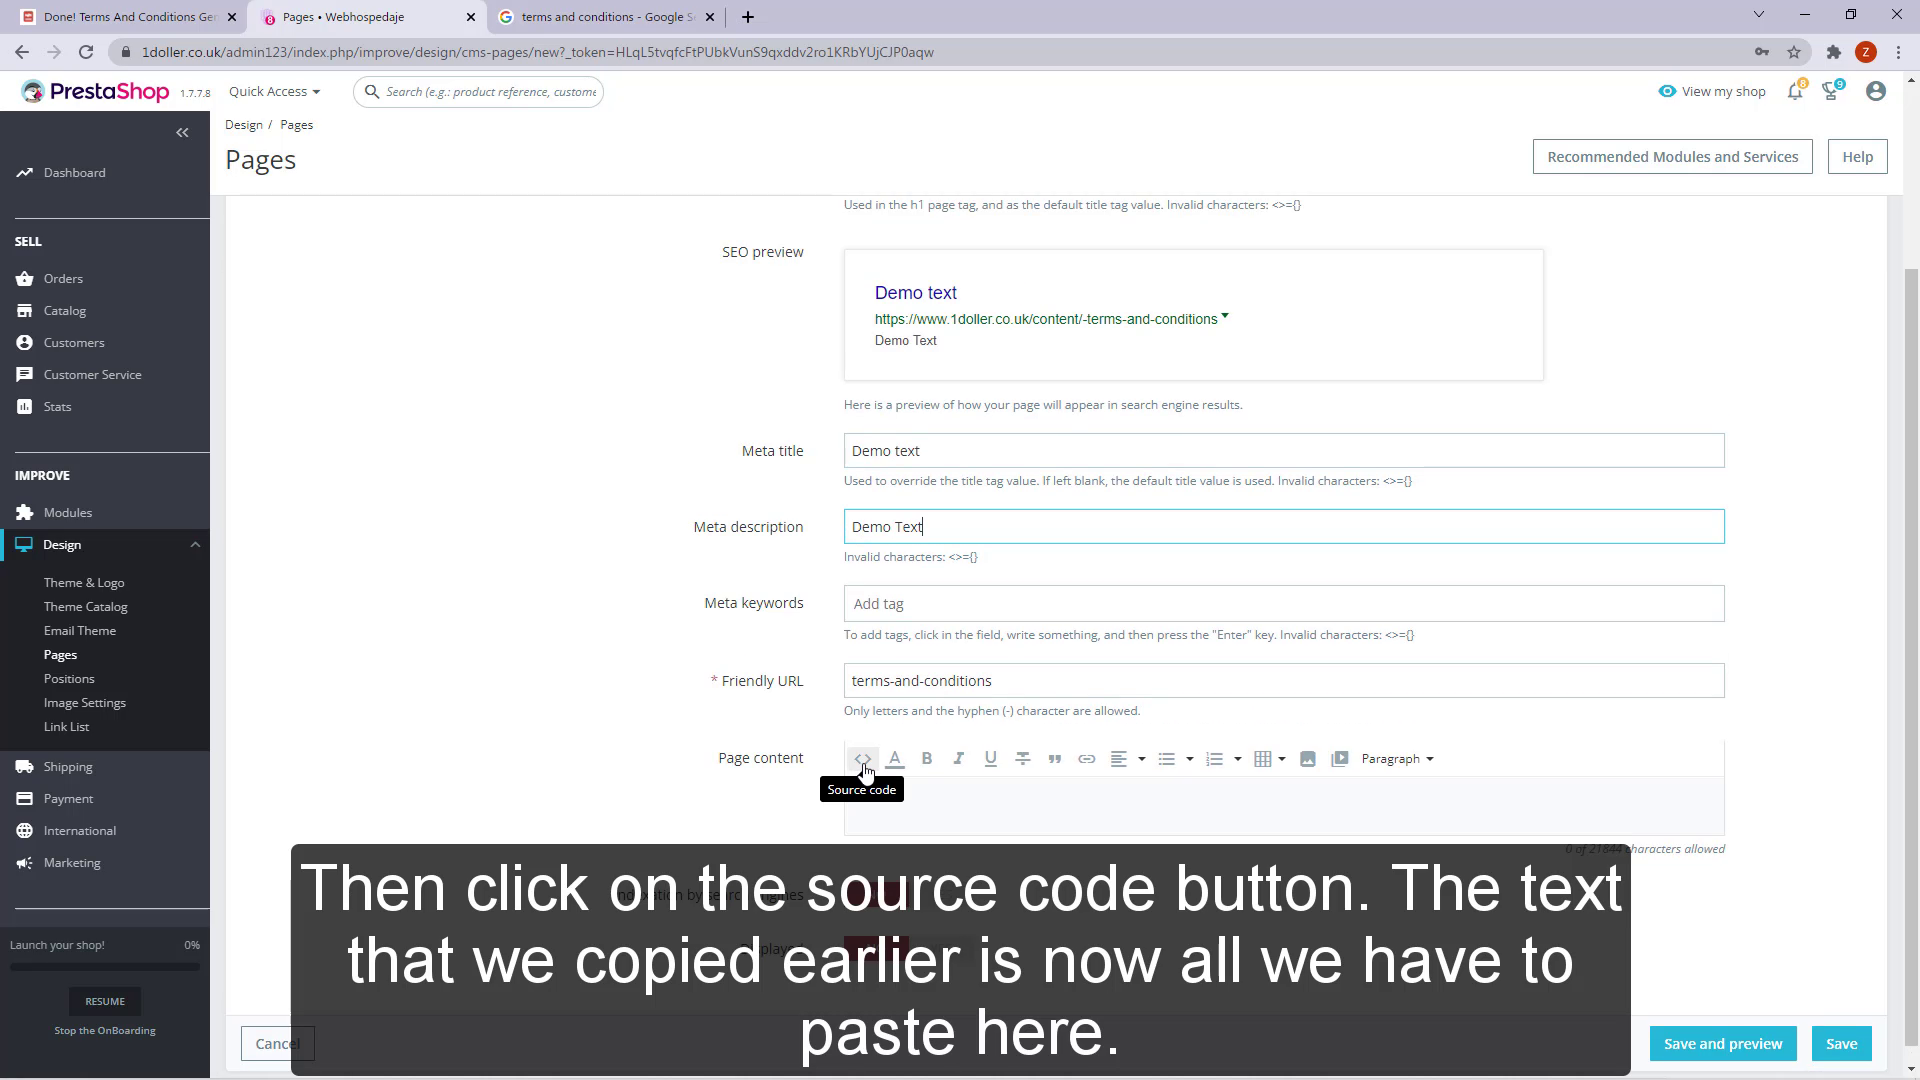 Then click on the source code button